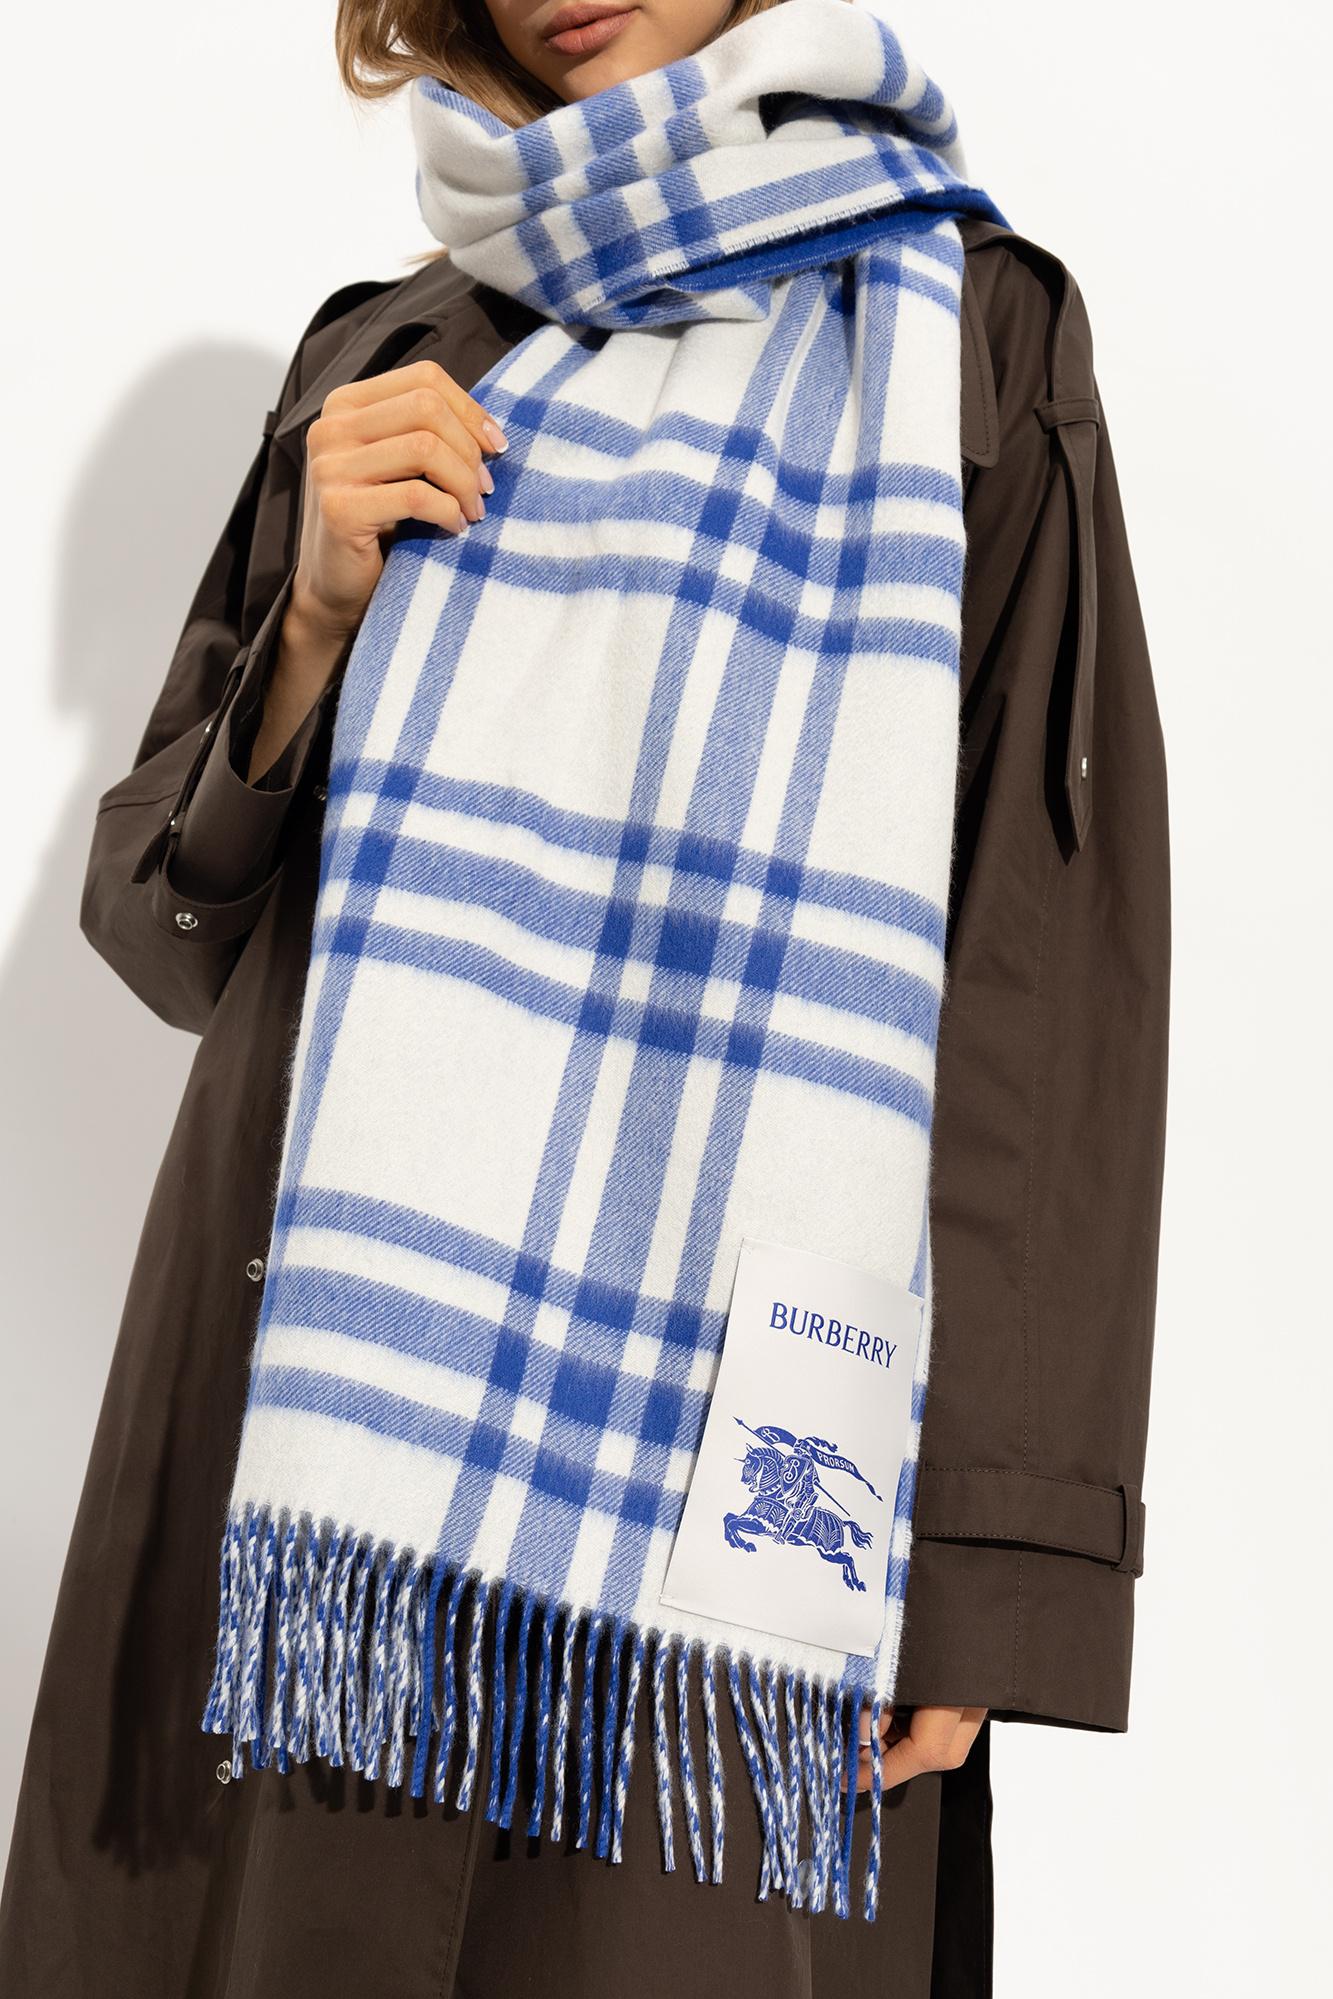 Burberry; Blue and white reversible cashmere scarf; Fall 2023 fashion